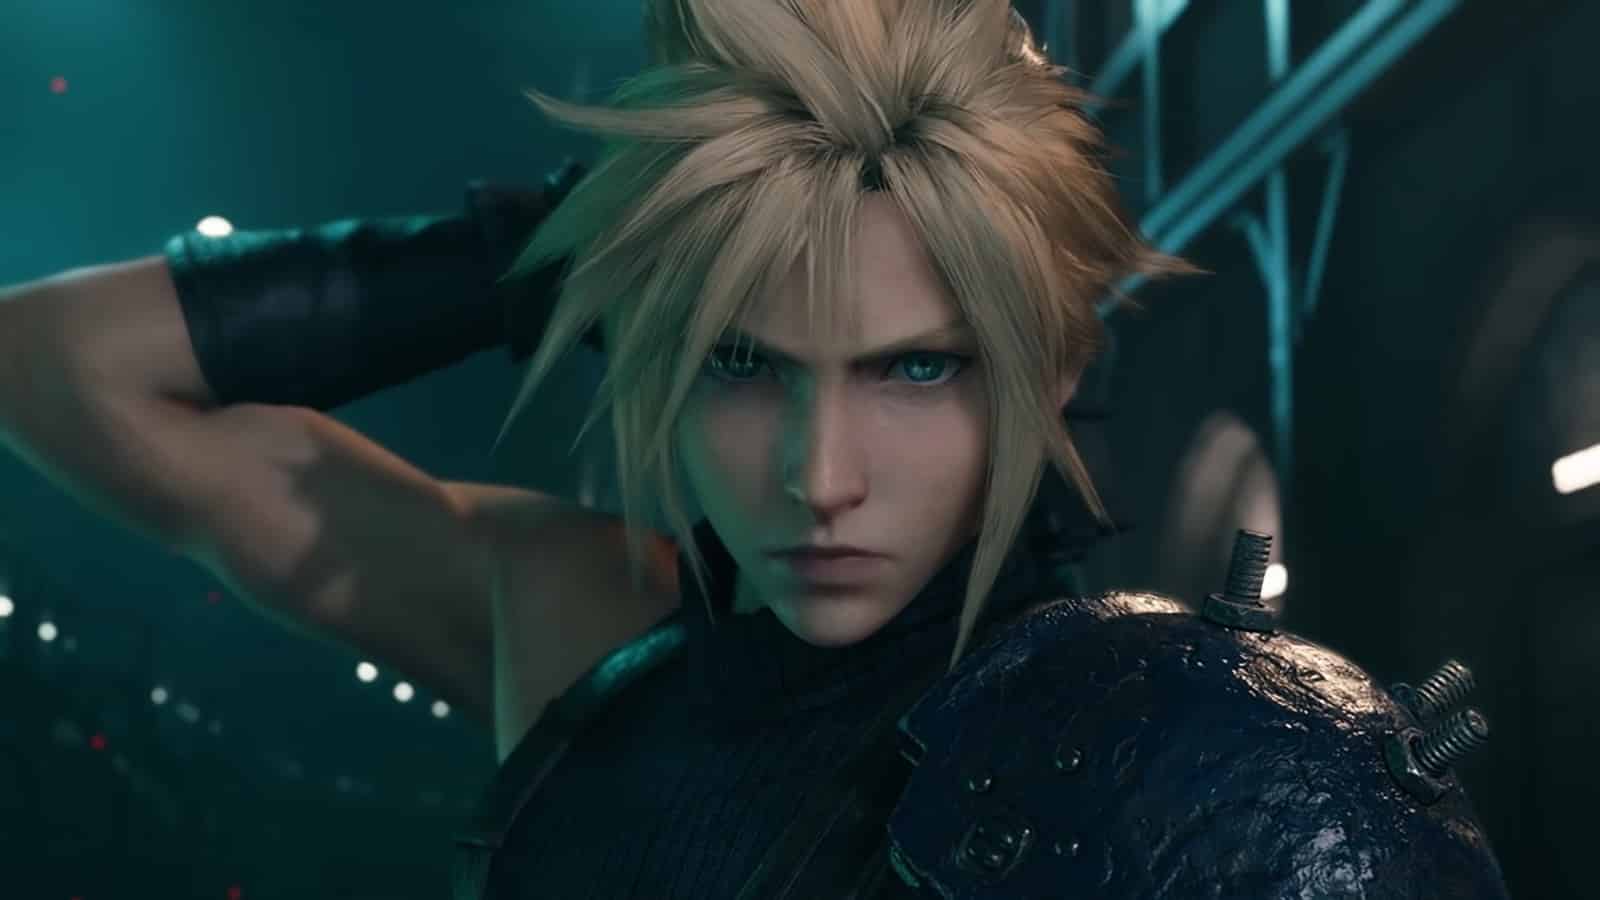 FF7 Remake Xbox One Version Confirmed By Multiple Retailers? 